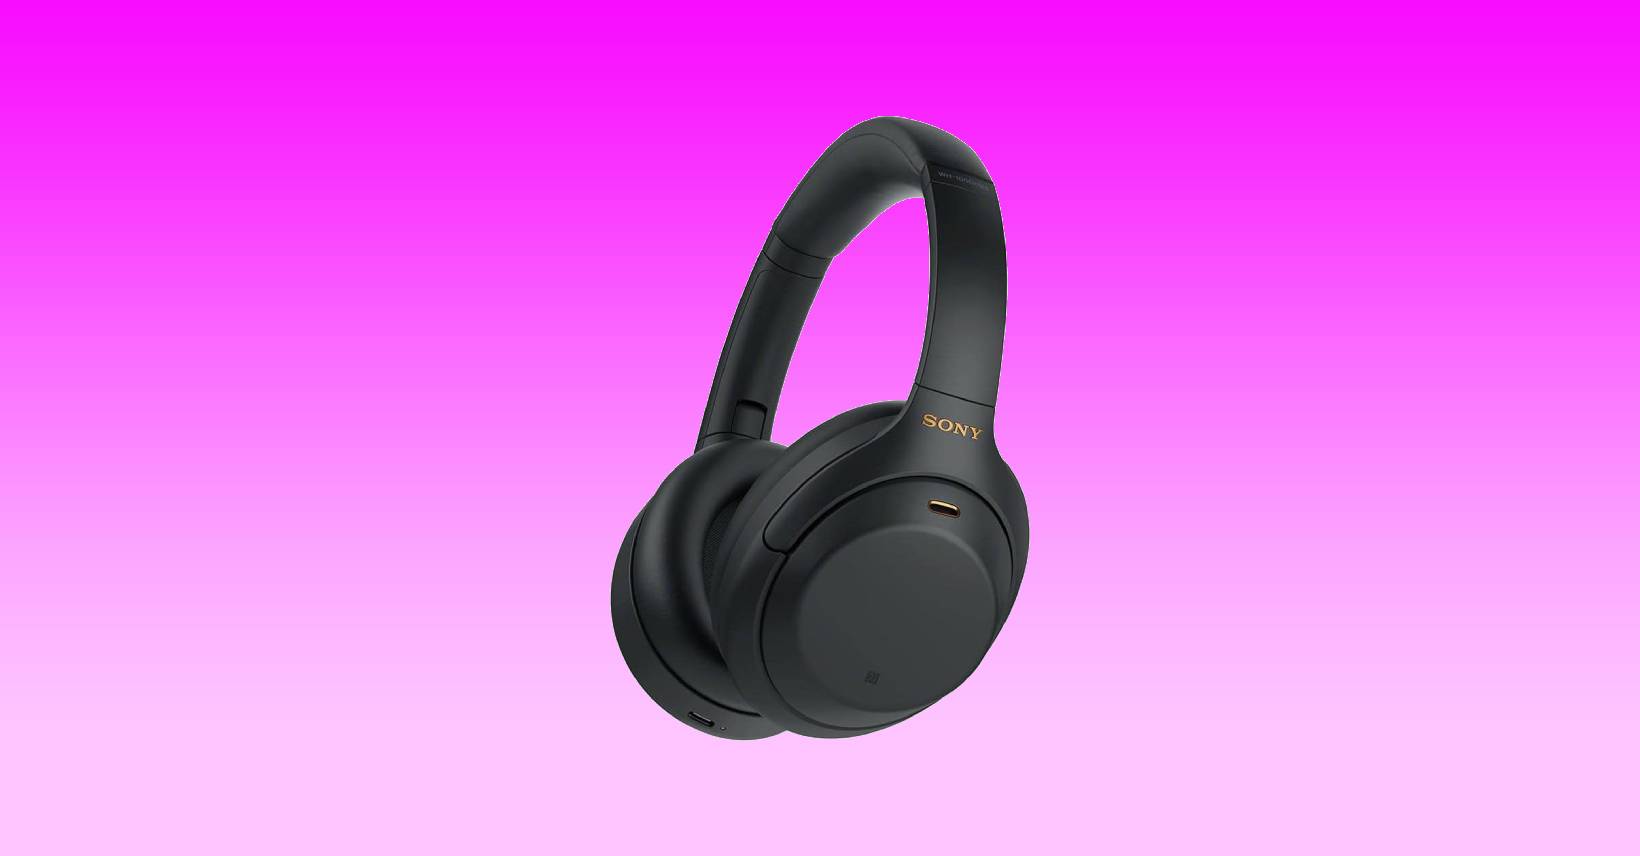 Save $102 on the Sony WH-1000XM4 Wireless Headphones – Prime Day deal